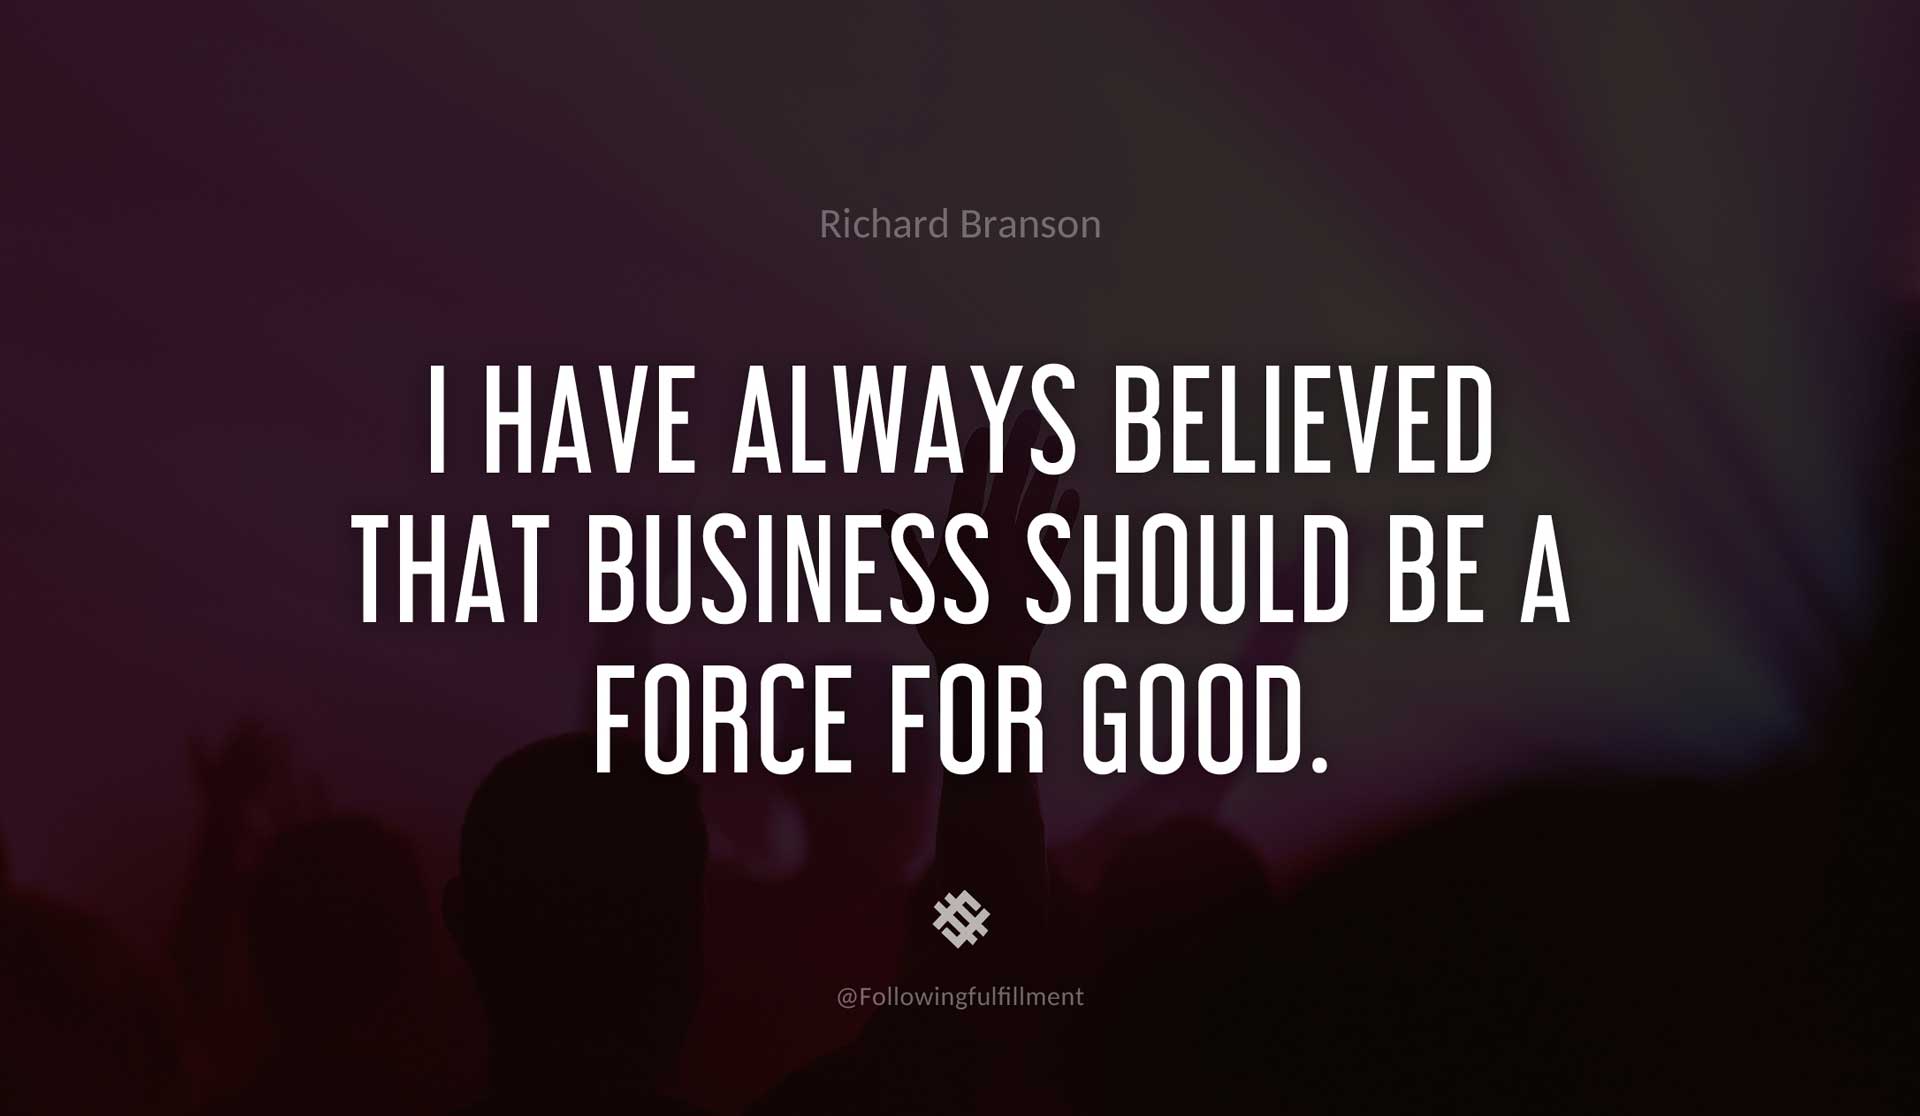 I-have-always-believed-that-business-should-be-a-force-for-good.-RICHARD-BRANSON-Quote.jpg